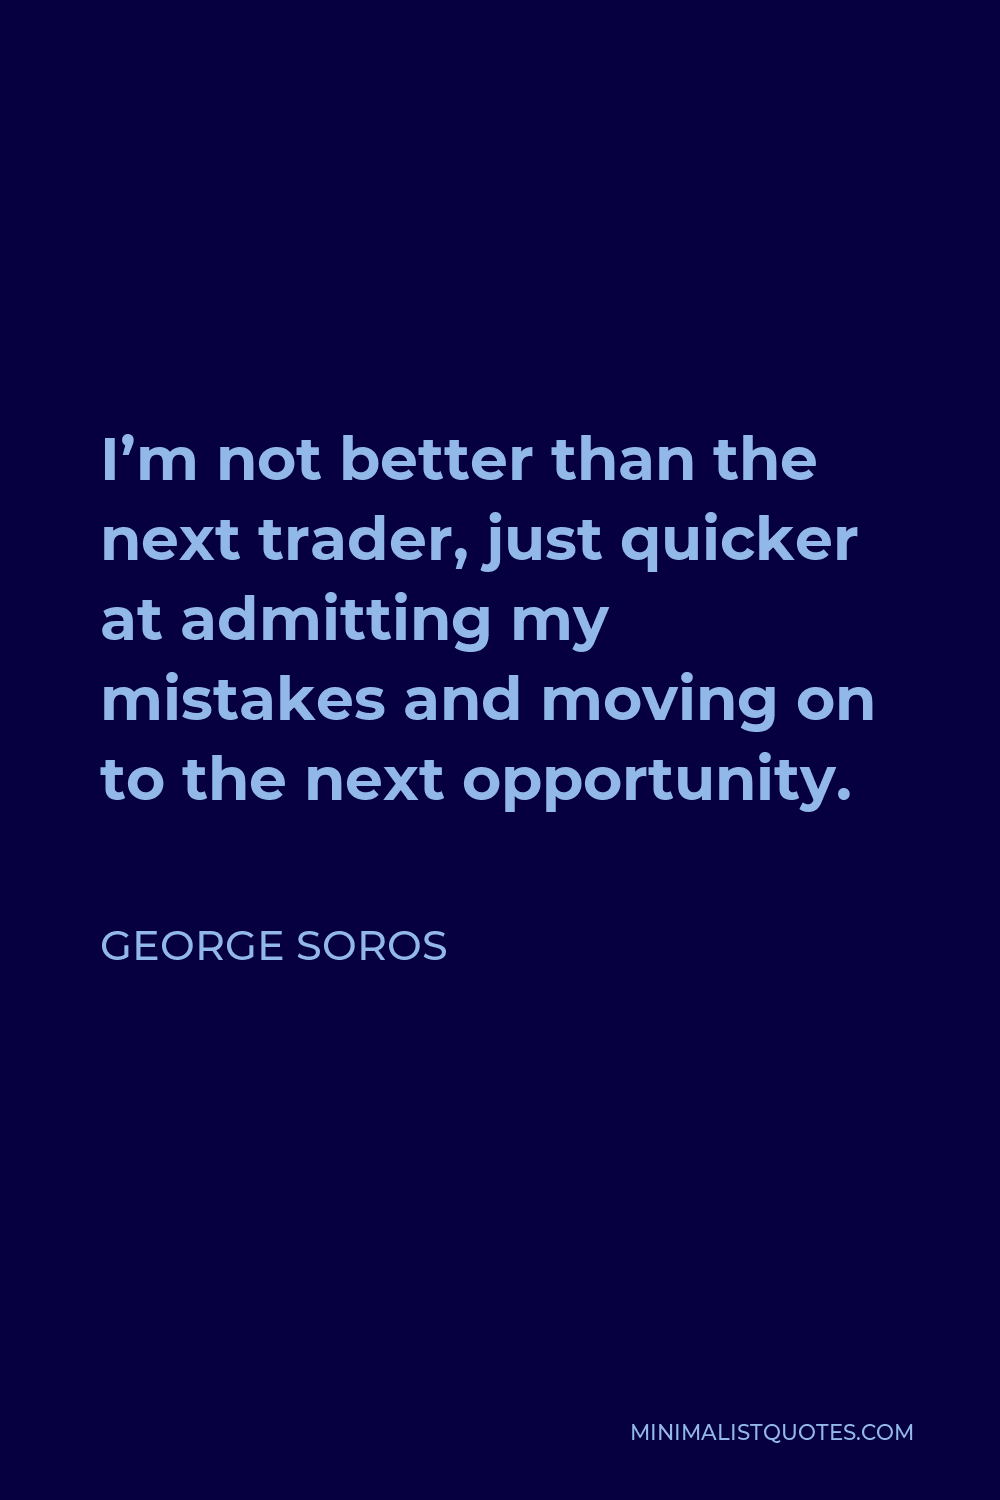 George Soros Quote - I’m not better than the next trader, just quicker at admitting my mistakes and moving on to the next opportunity.